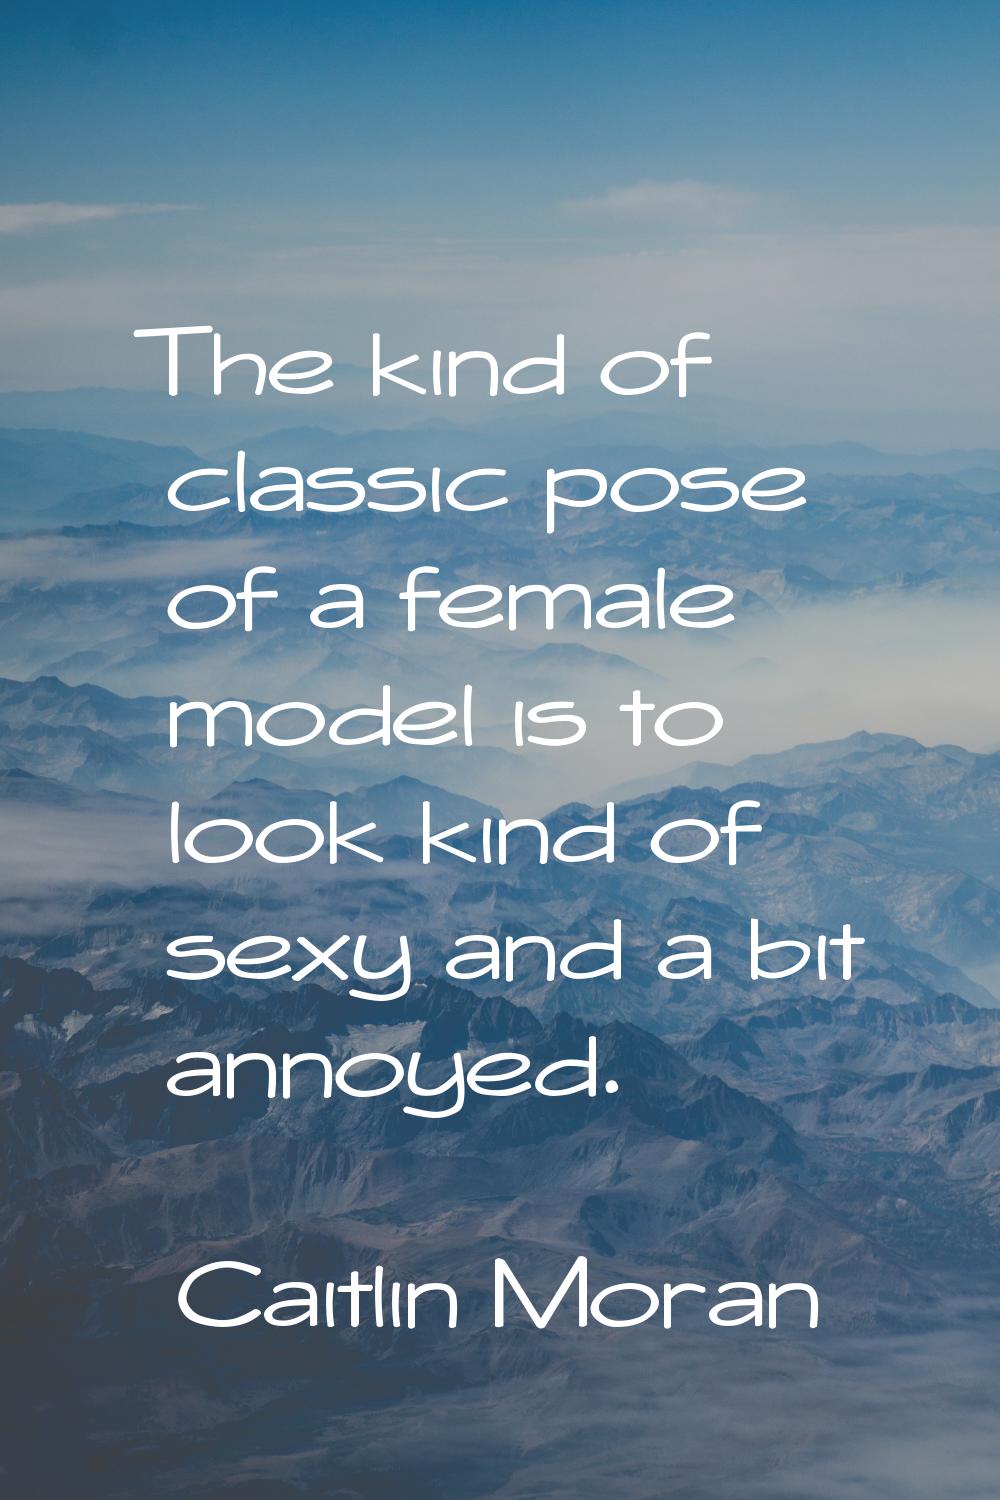 The kind of classic pose of a female model is to look kind of sexy and a bit annoyed.